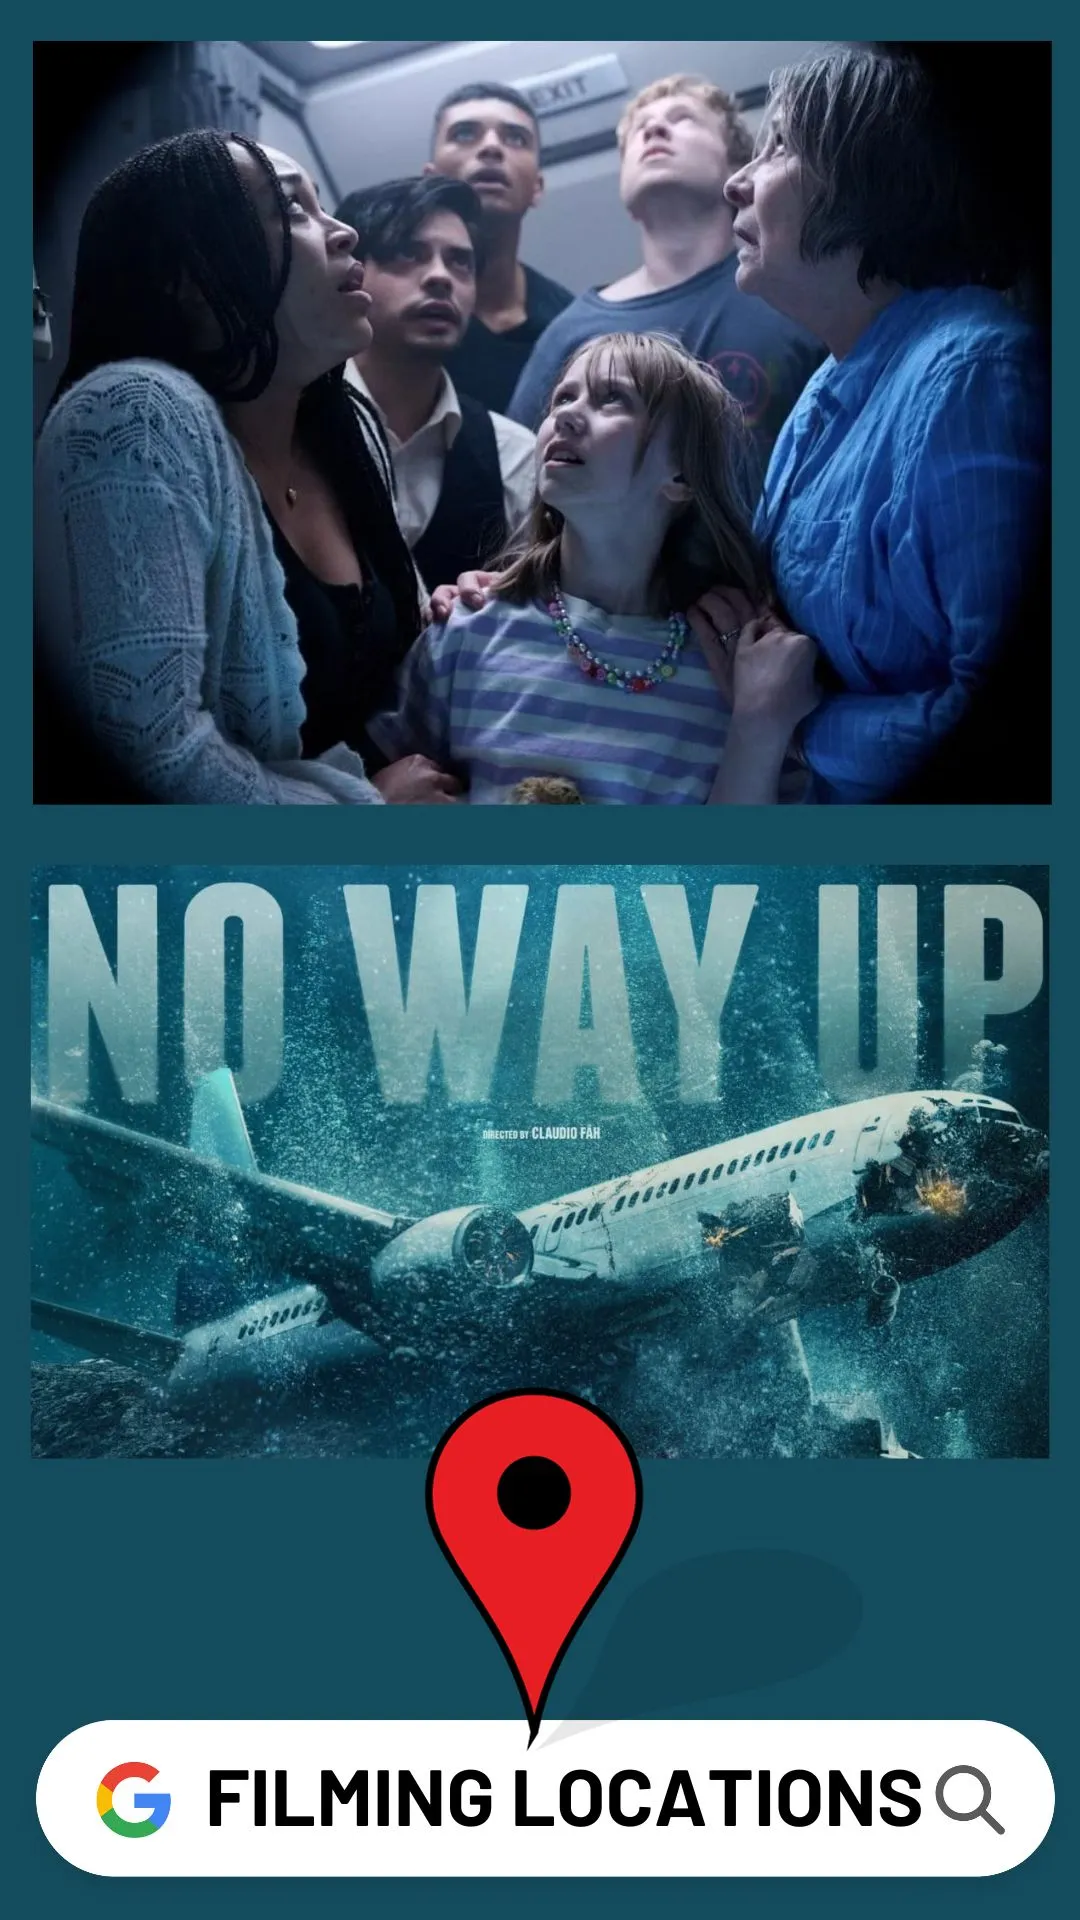 No Way Up Filming Locations